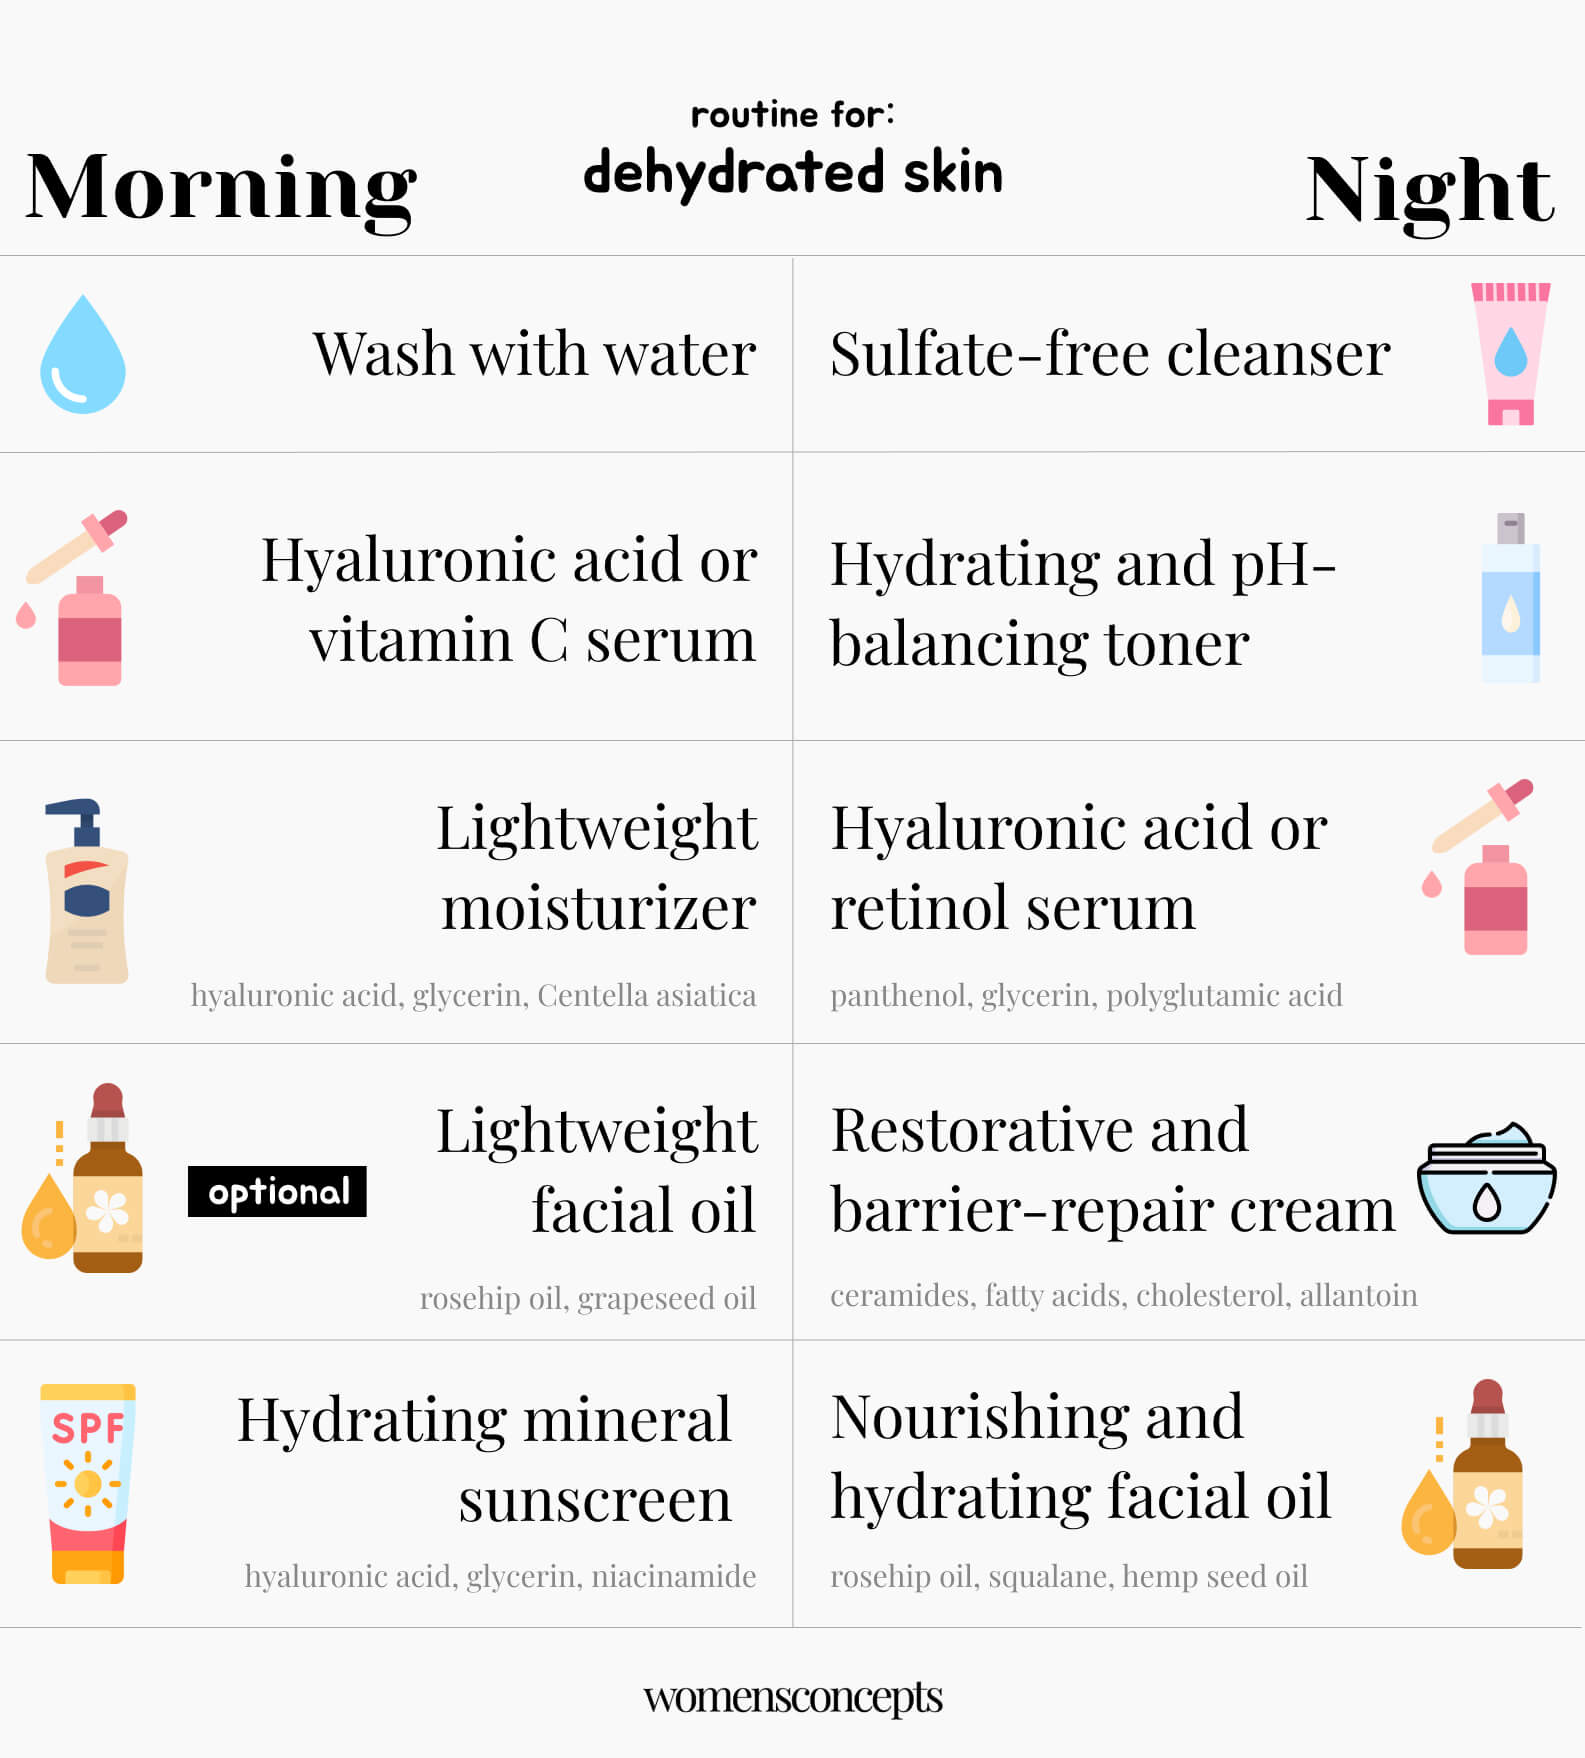 skincare routine for dehydrated skin